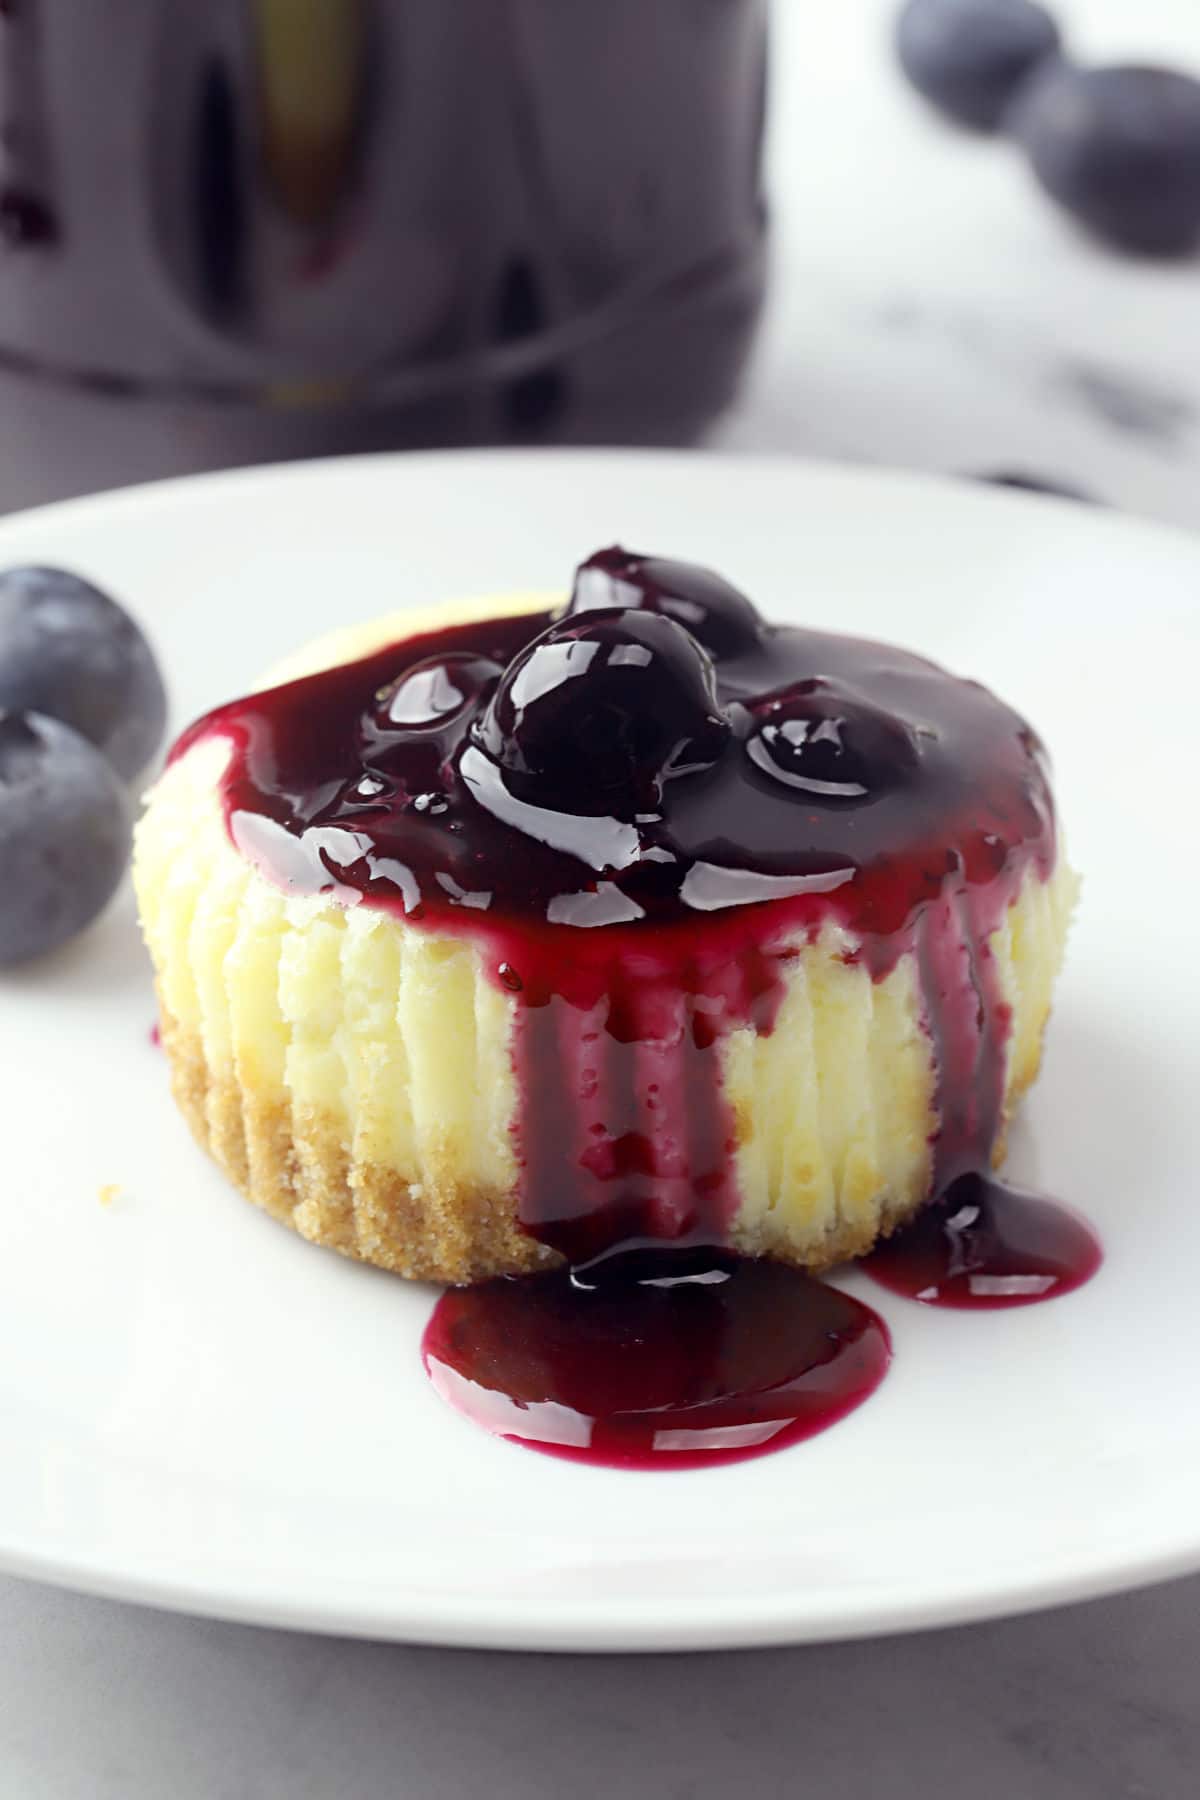 Mini cheesecake topped with blueberry sauce on a white plate.